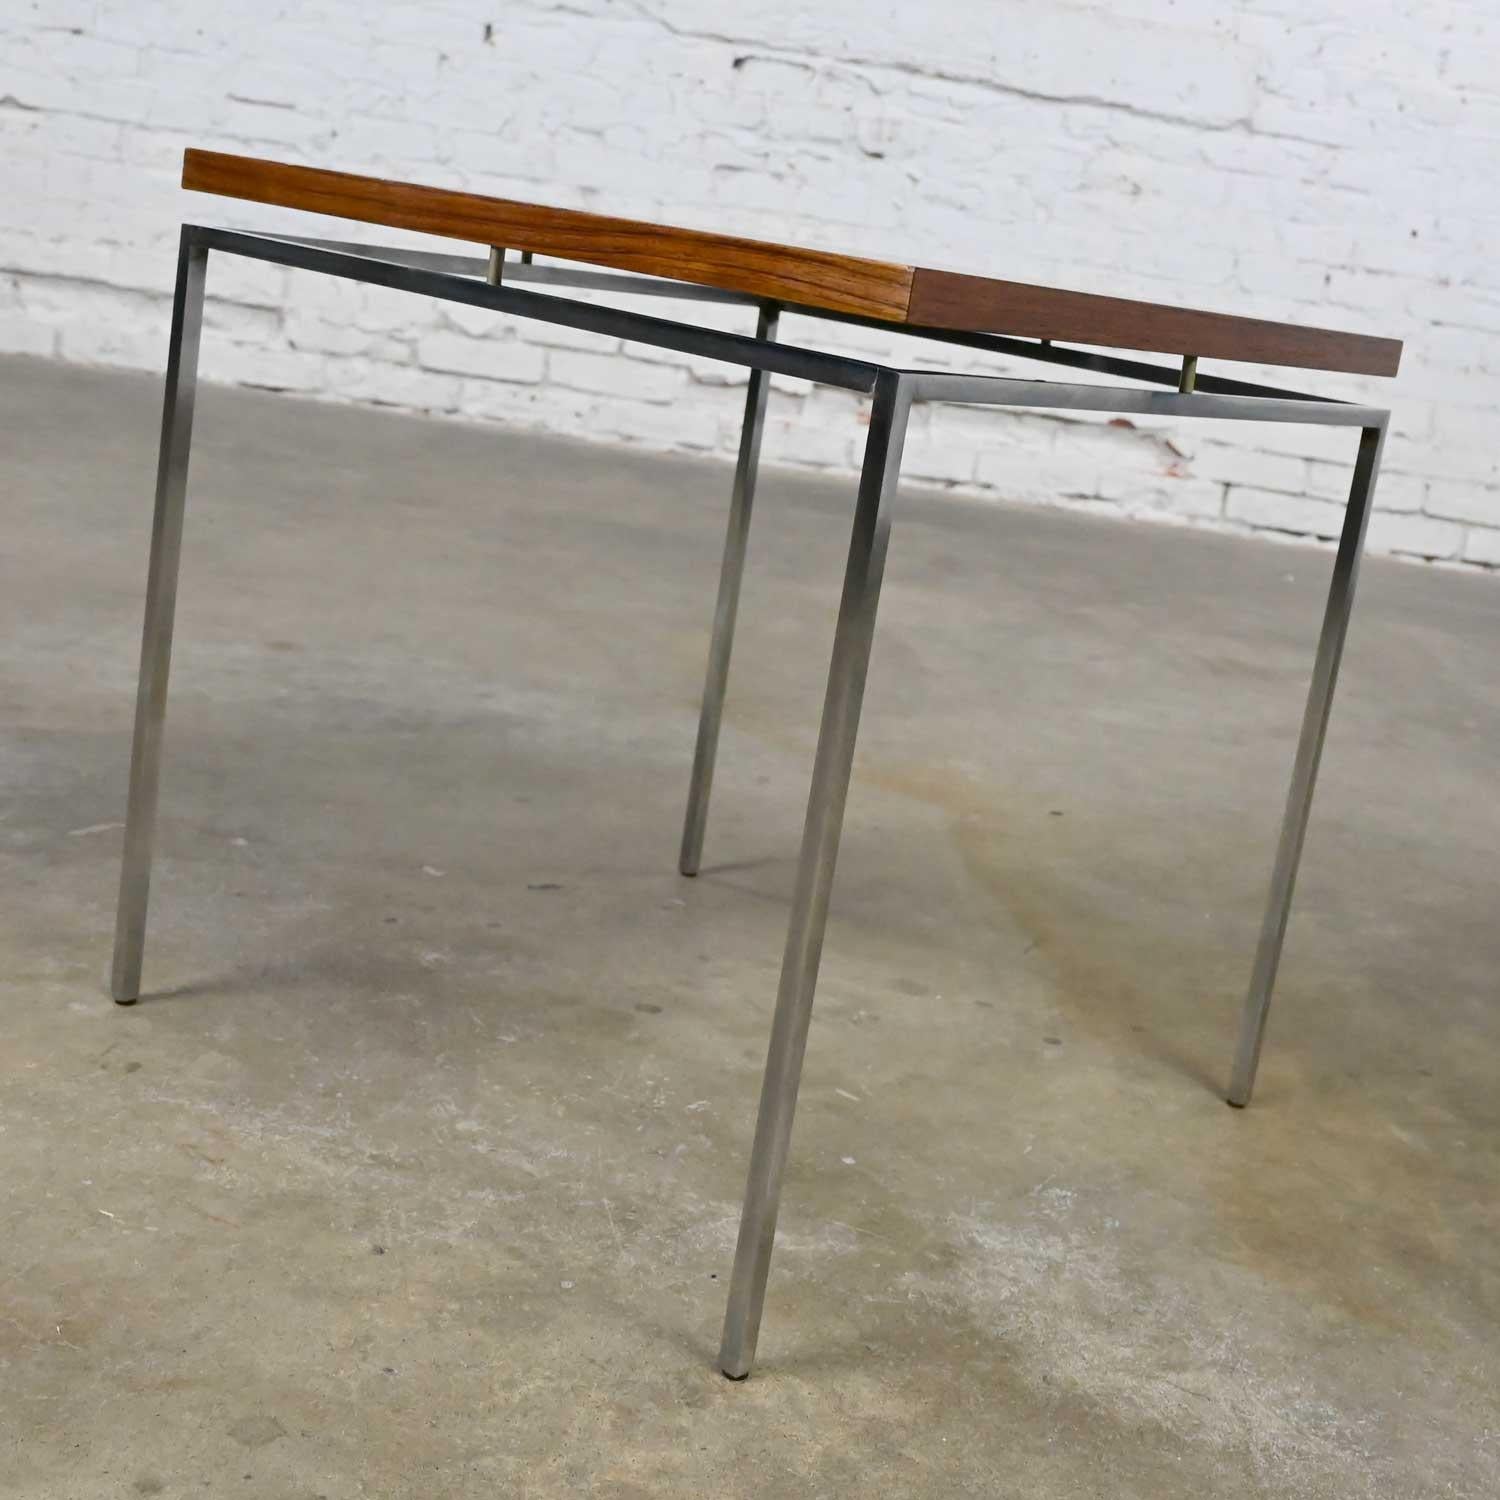 20th Century Scandinavian Modern Rosewood & Chrome End Table by Knud Joos for Jason Mobler For Sale